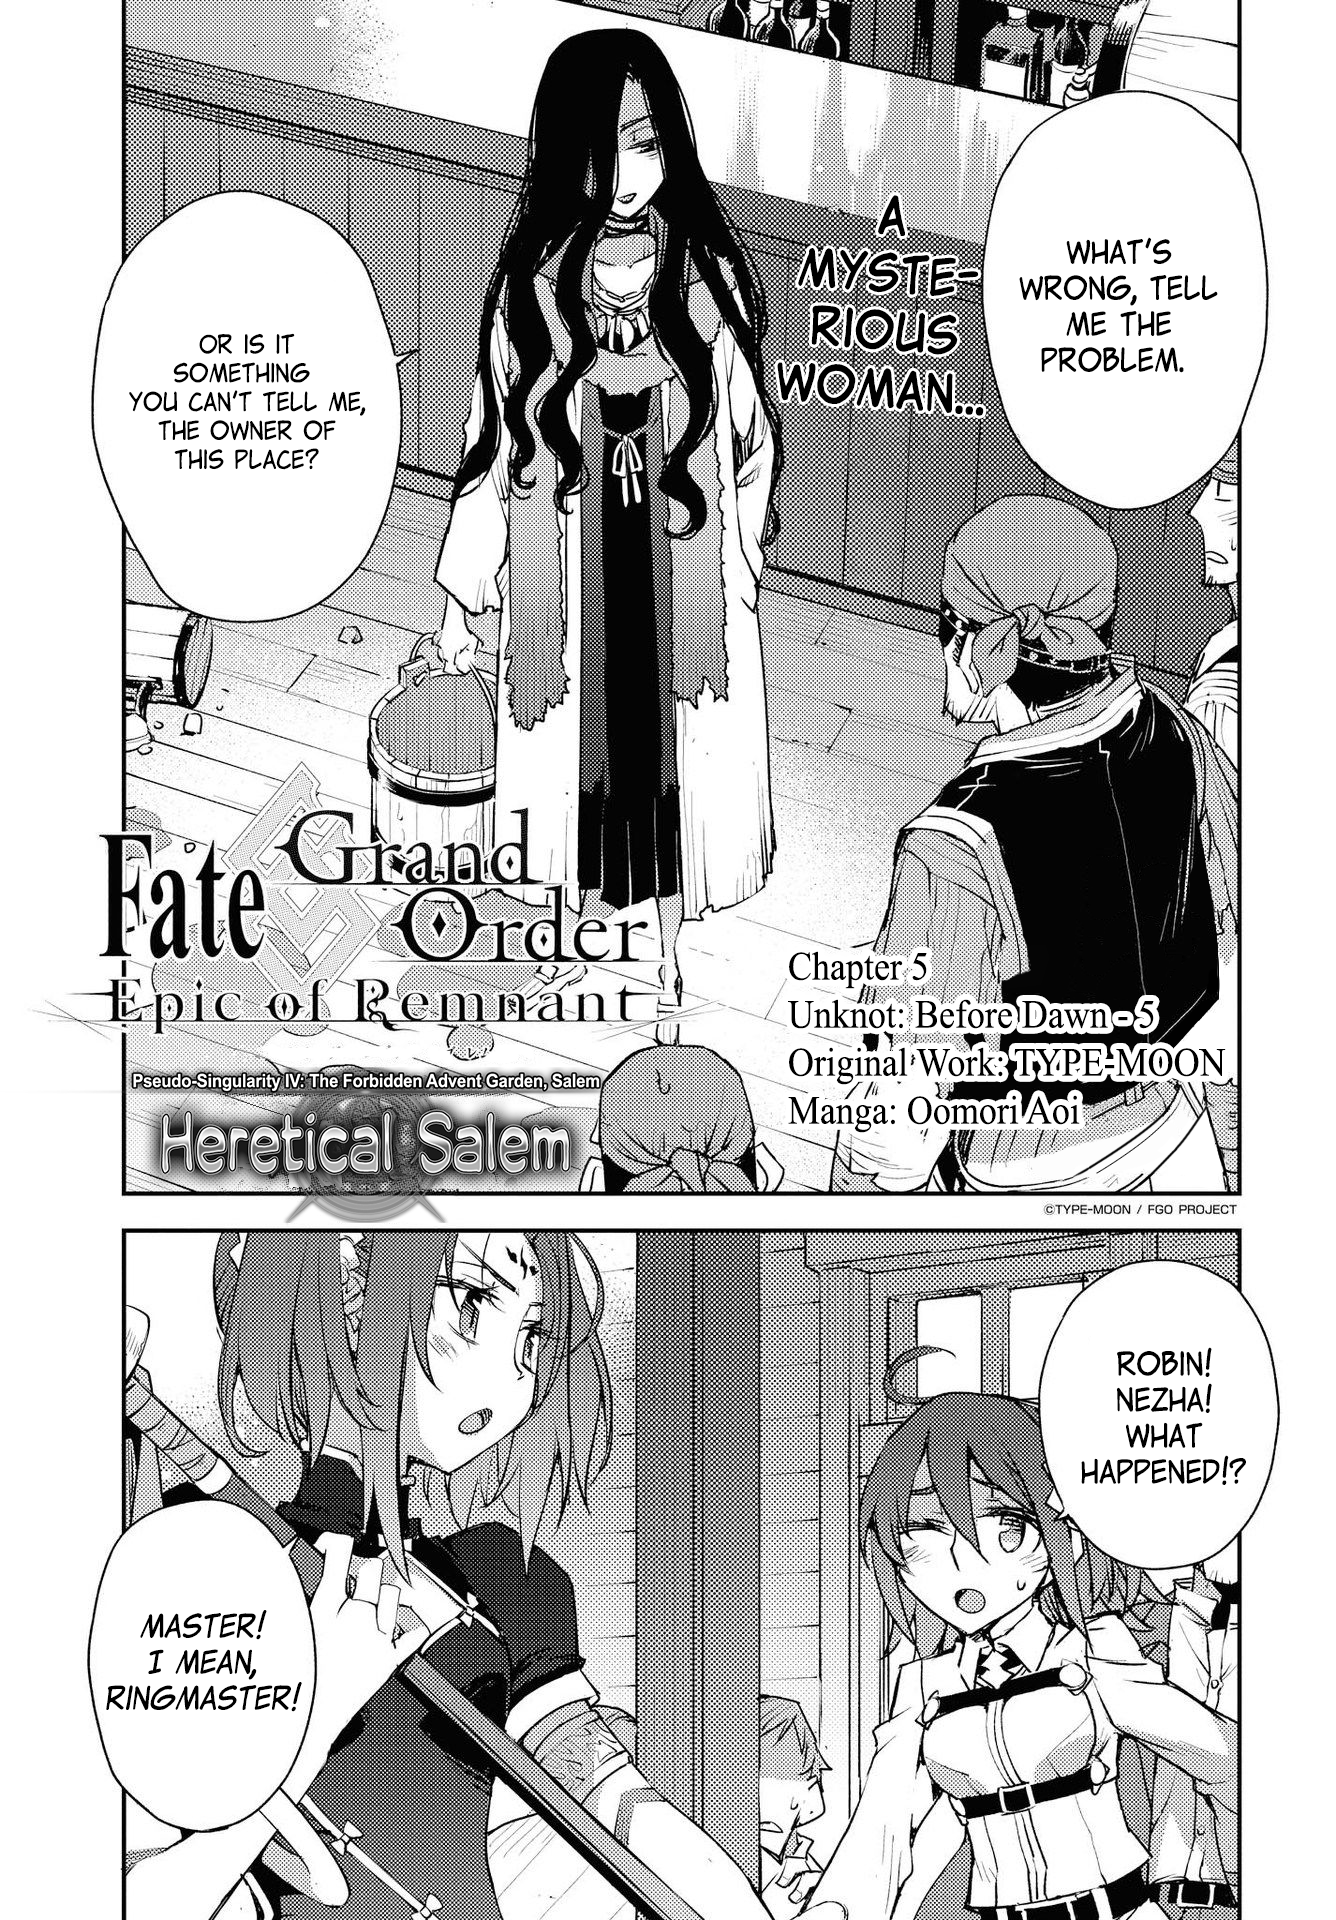 Fate/grand Order: Epic Of Remnant: Pseudo-Singularity Iv: The Forbidden Advent Garden, Salem - Heretical Salem Chapter 6: Unknot: Before Dawn 5 - Picture 1